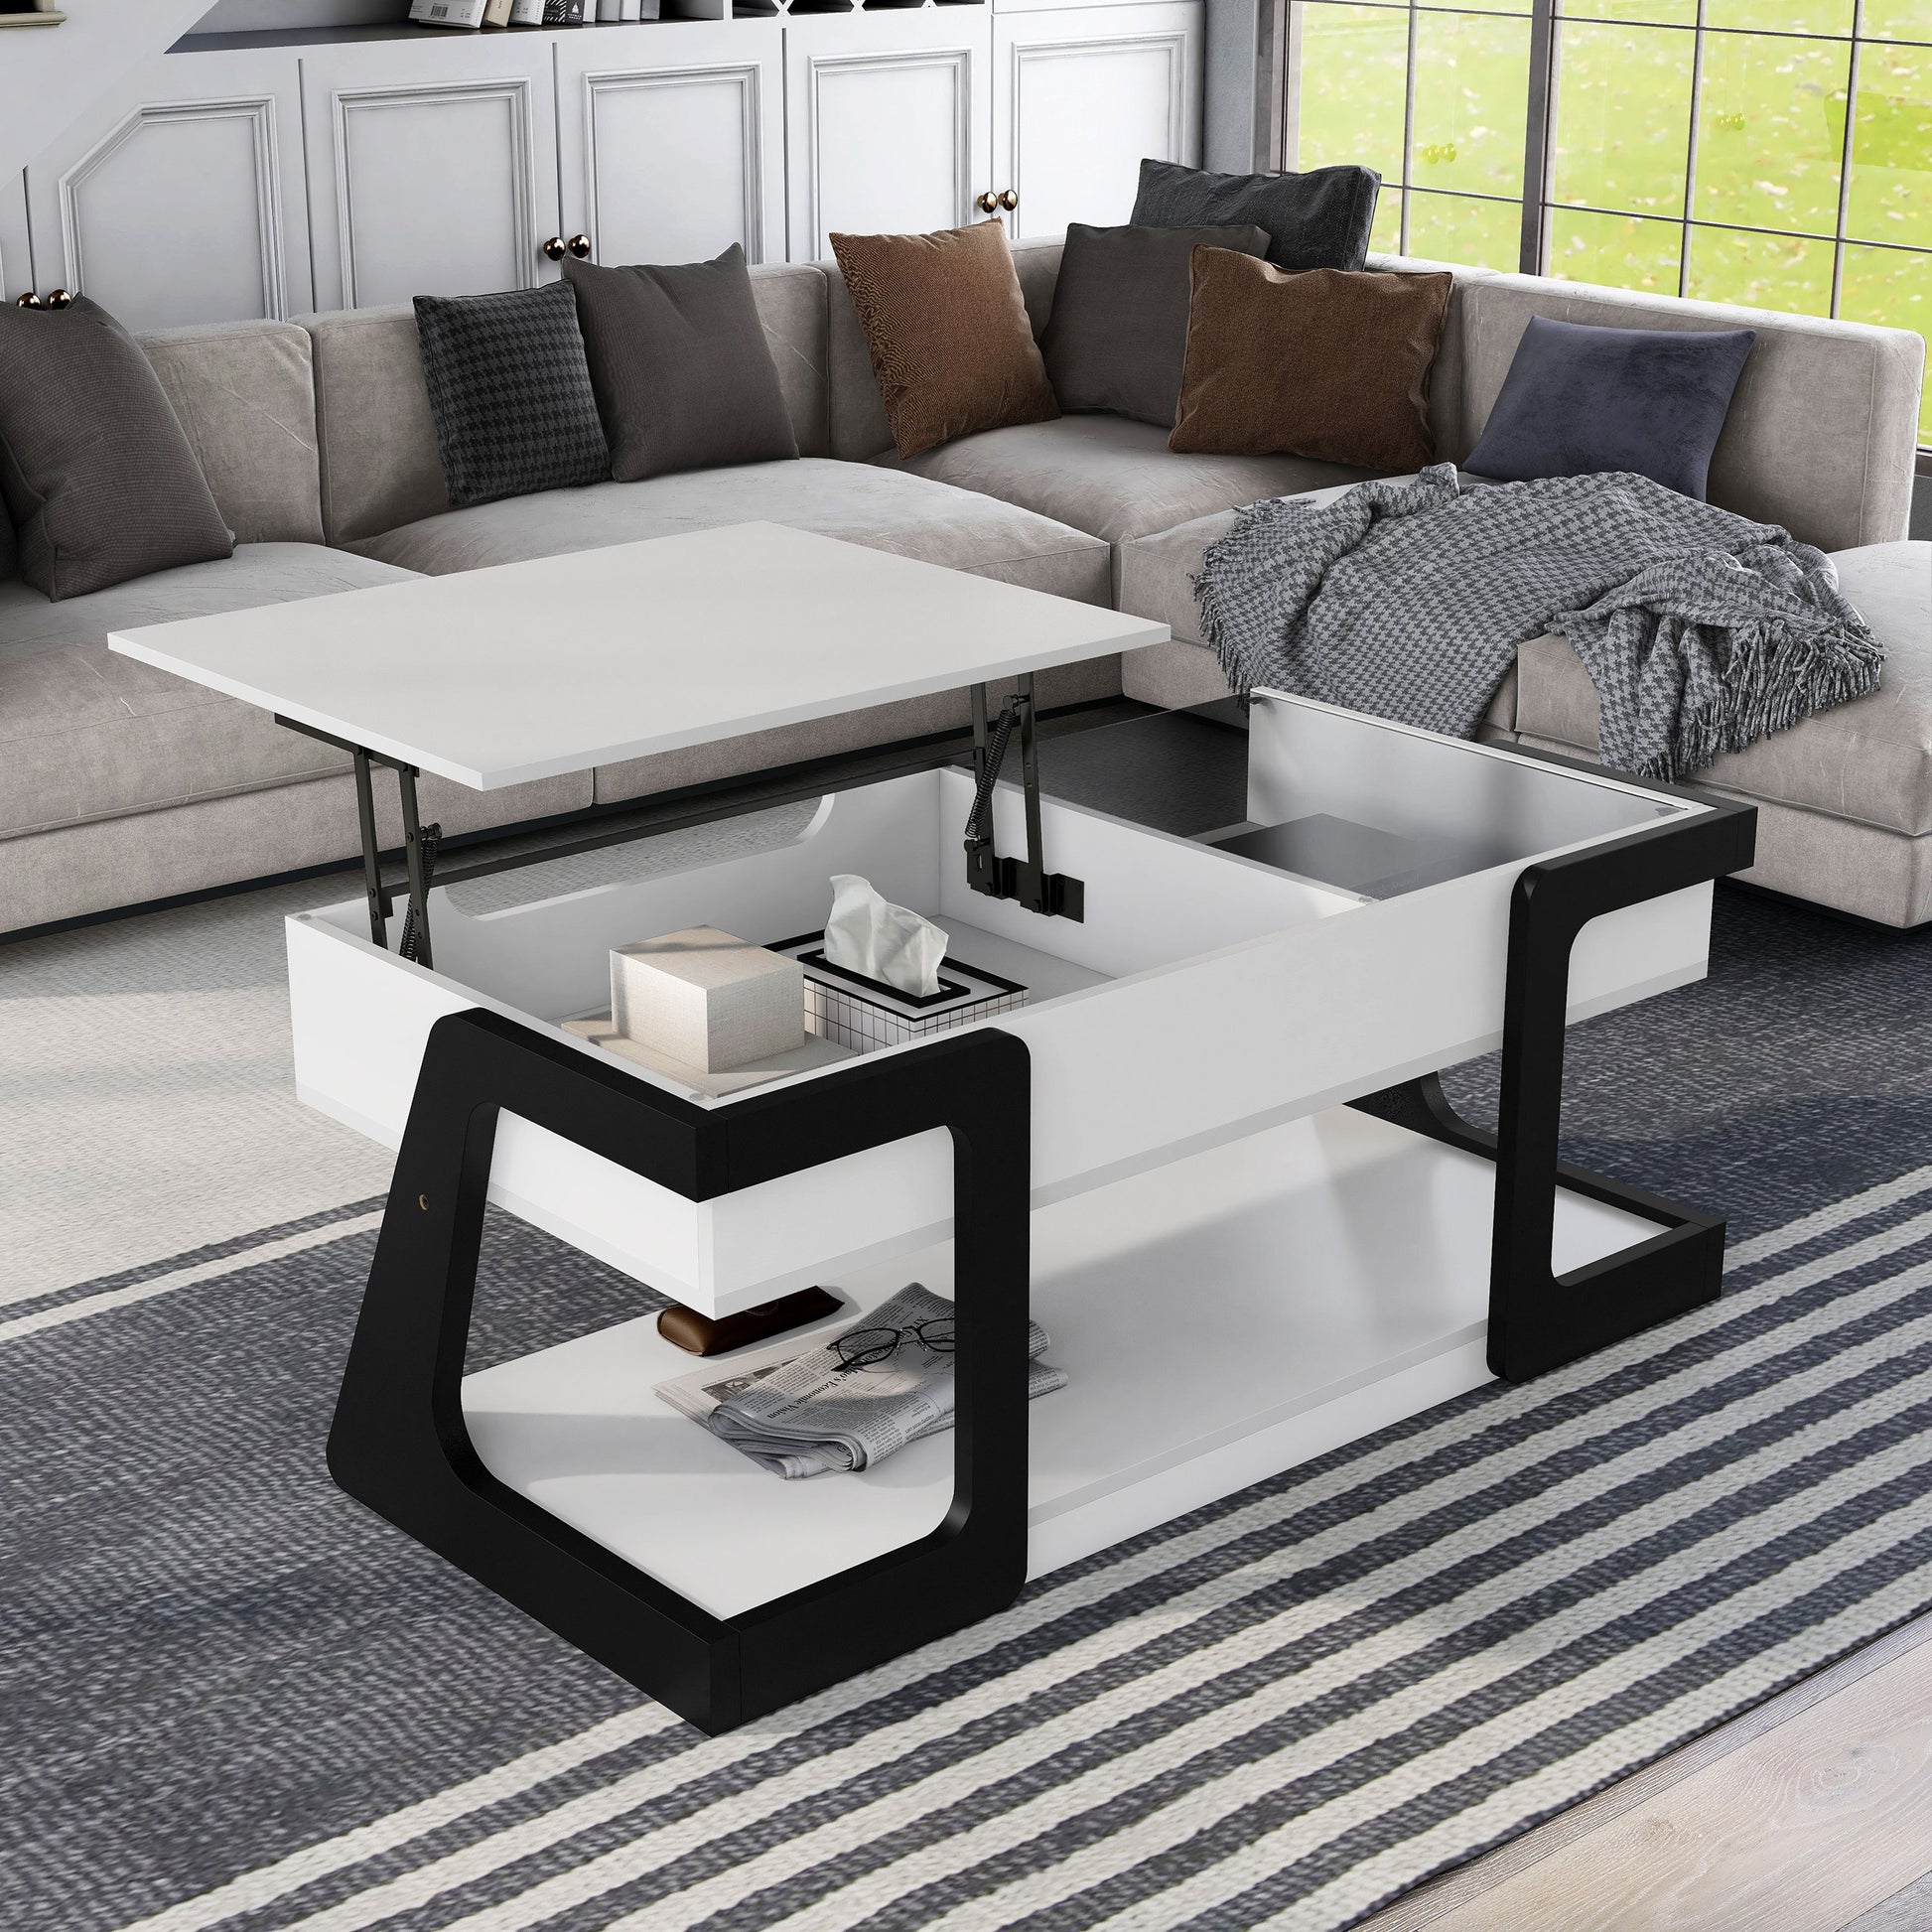 Right angled contemporary white and black lift-top storage coffee table with two shelves and top raised in a living room with accessories